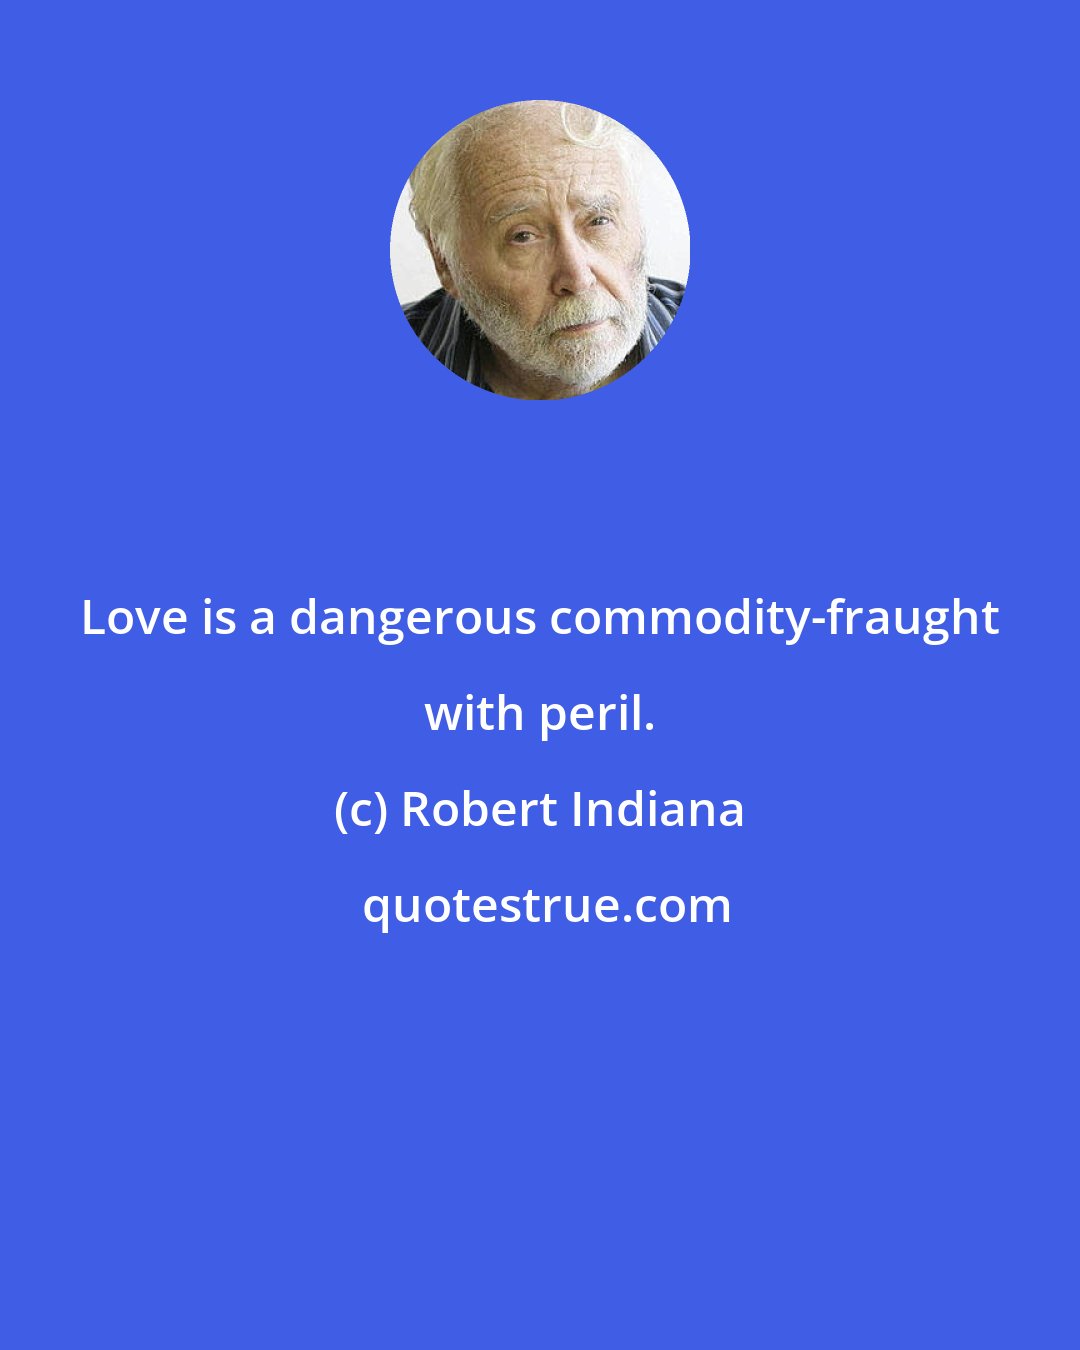 Robert Indiana: Love is a dangerous commodity-fraught with peril.